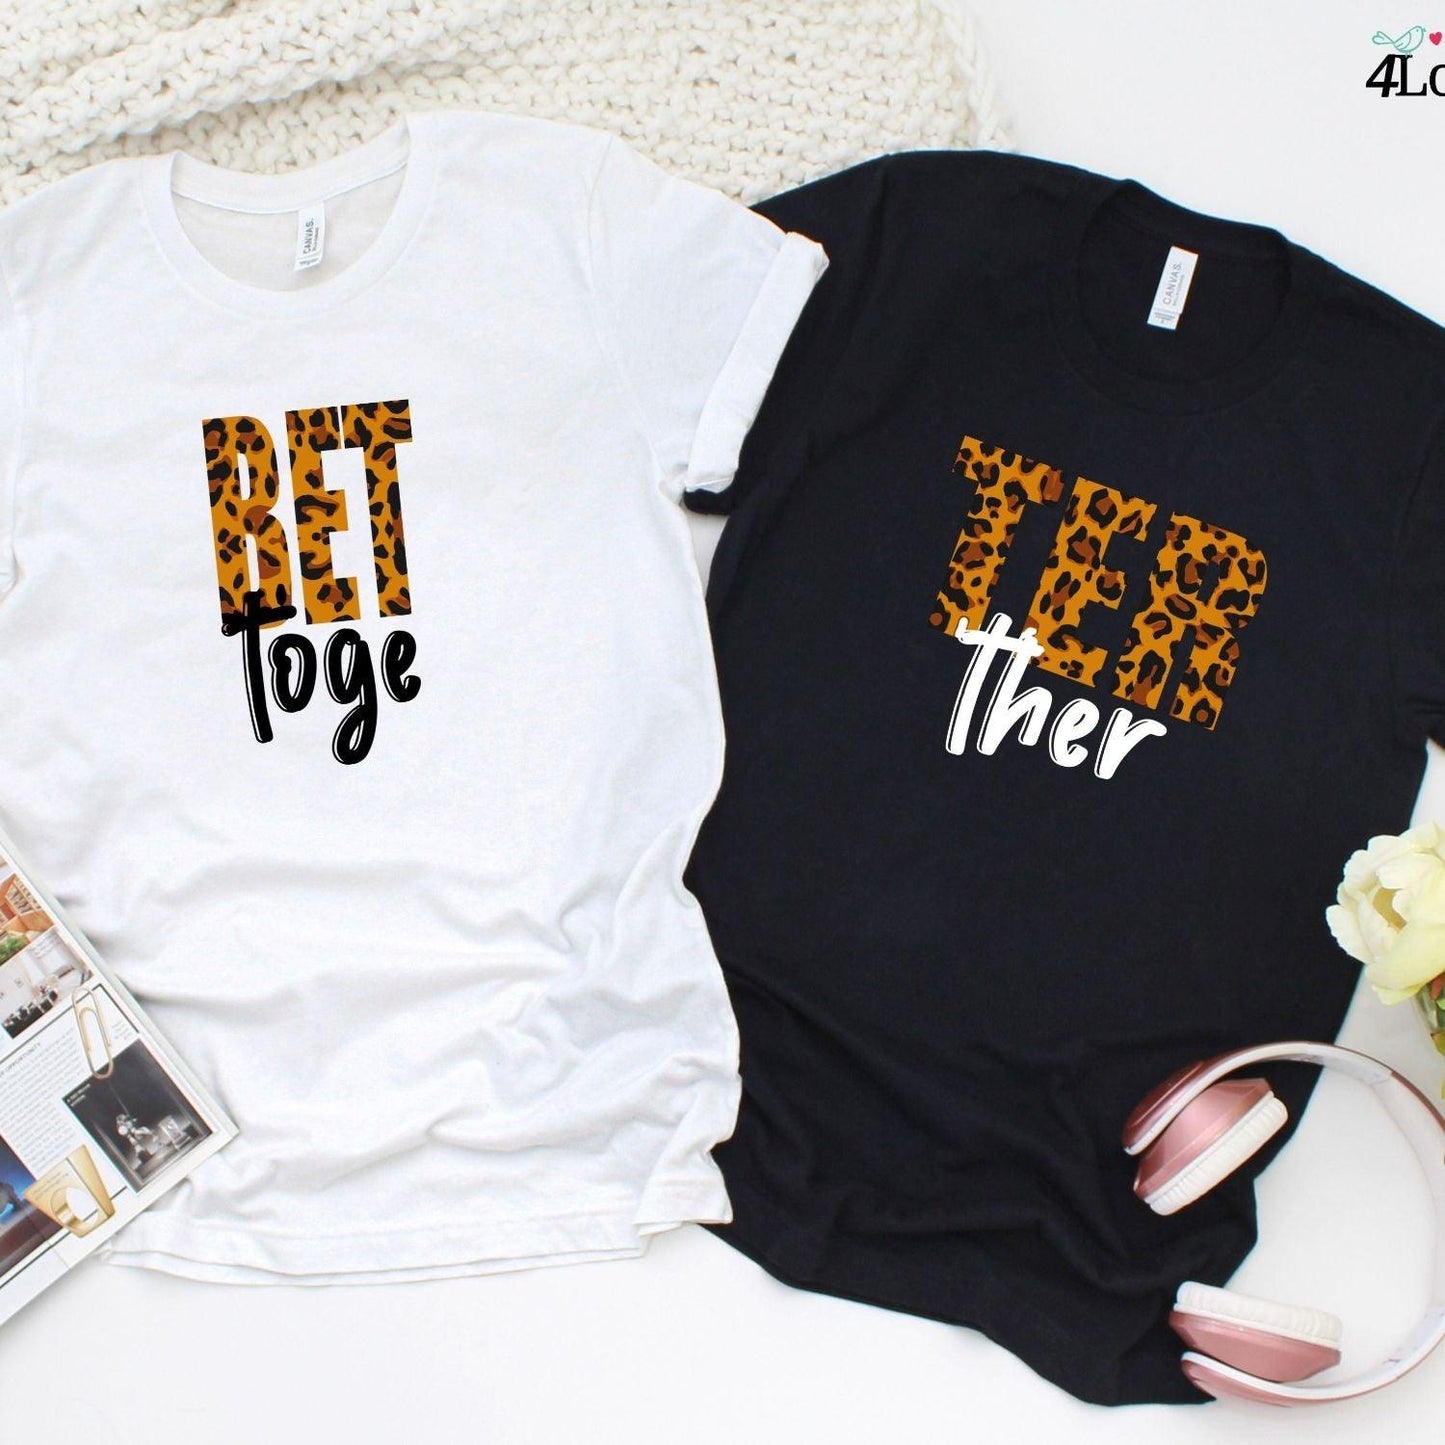 Matching Set: Better Together, Cute Couple Outfit, Gift for Lovers, Boyfriend & Girlfriend - 4Lovebirds